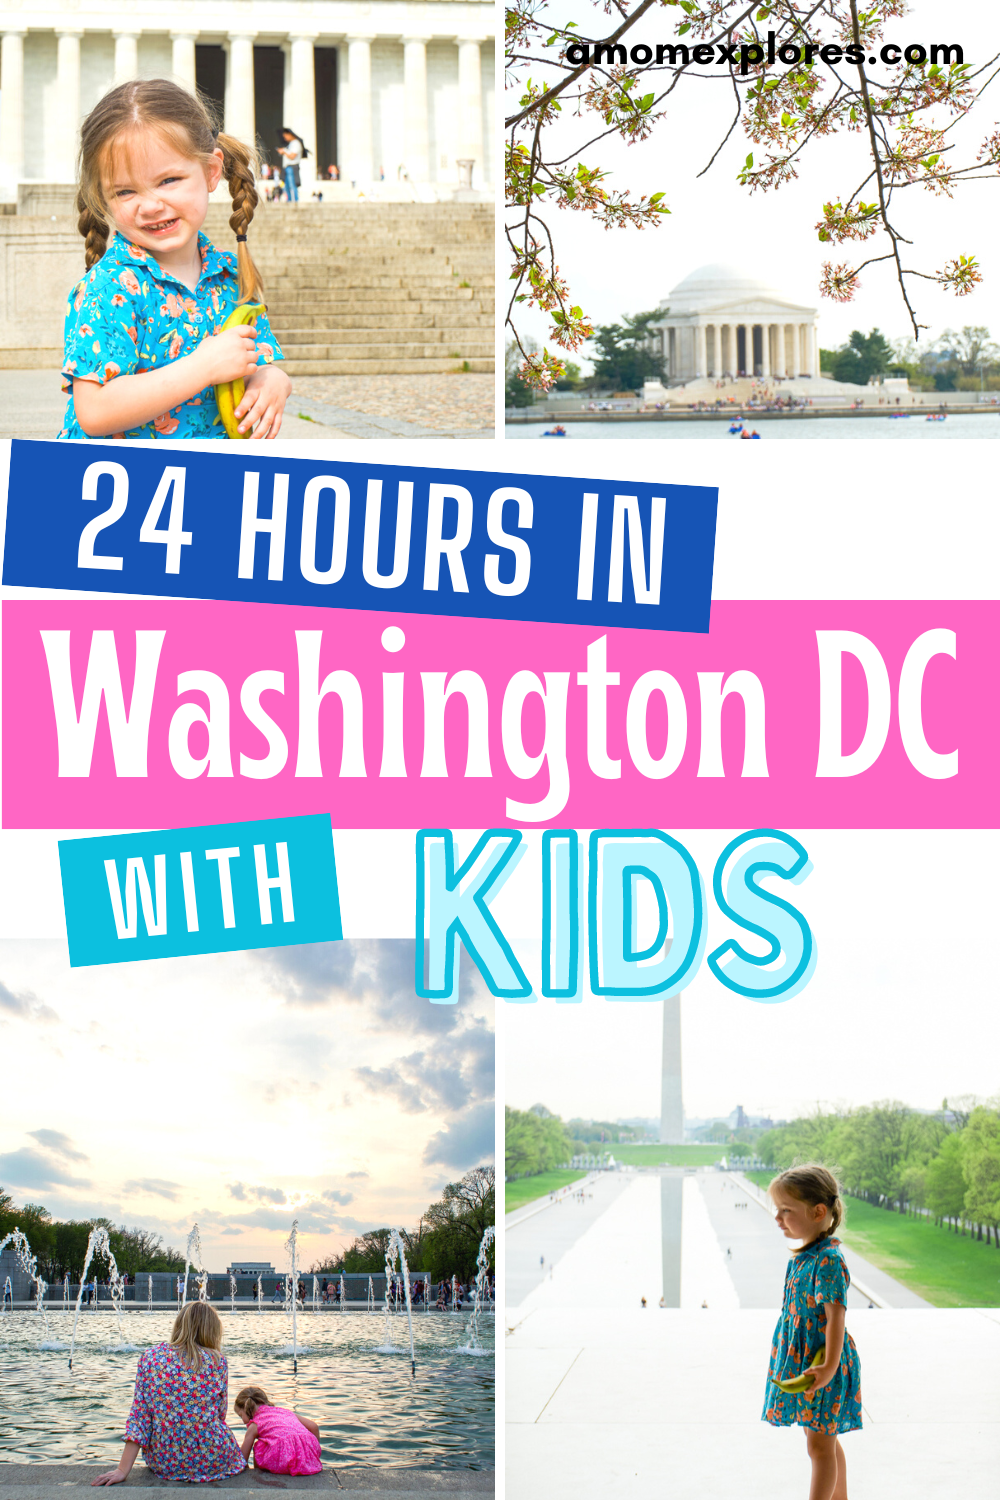 24 hours in Washington DC with kids.png